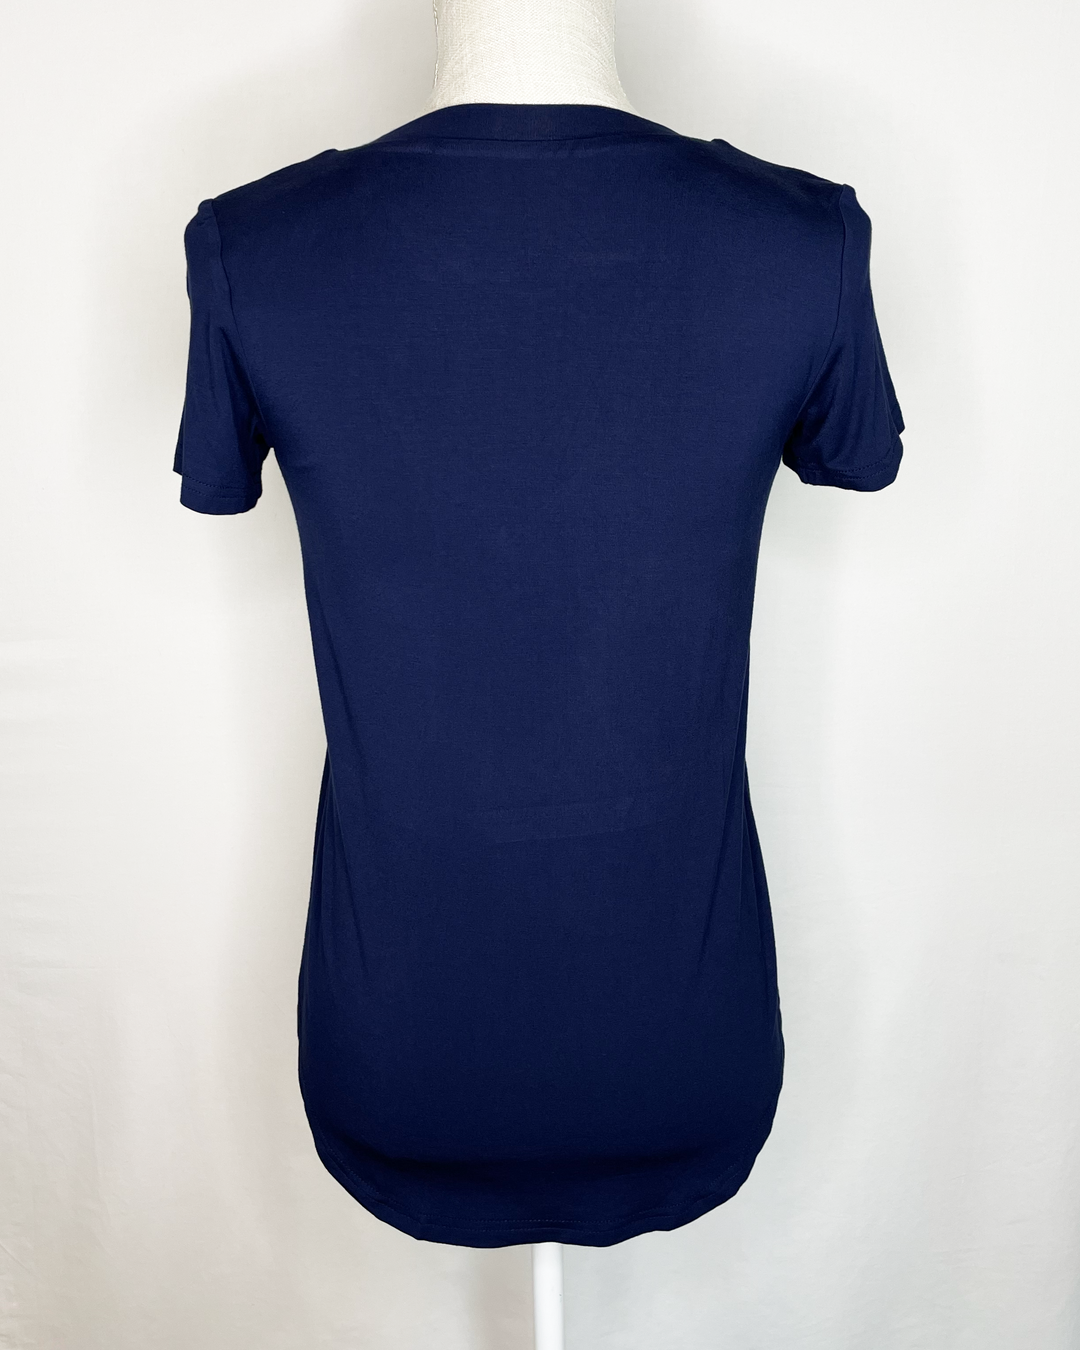 ALICIA Short-Sleeved Braless V-Neck Gather Front Bamboo Top back view - True Navy color 